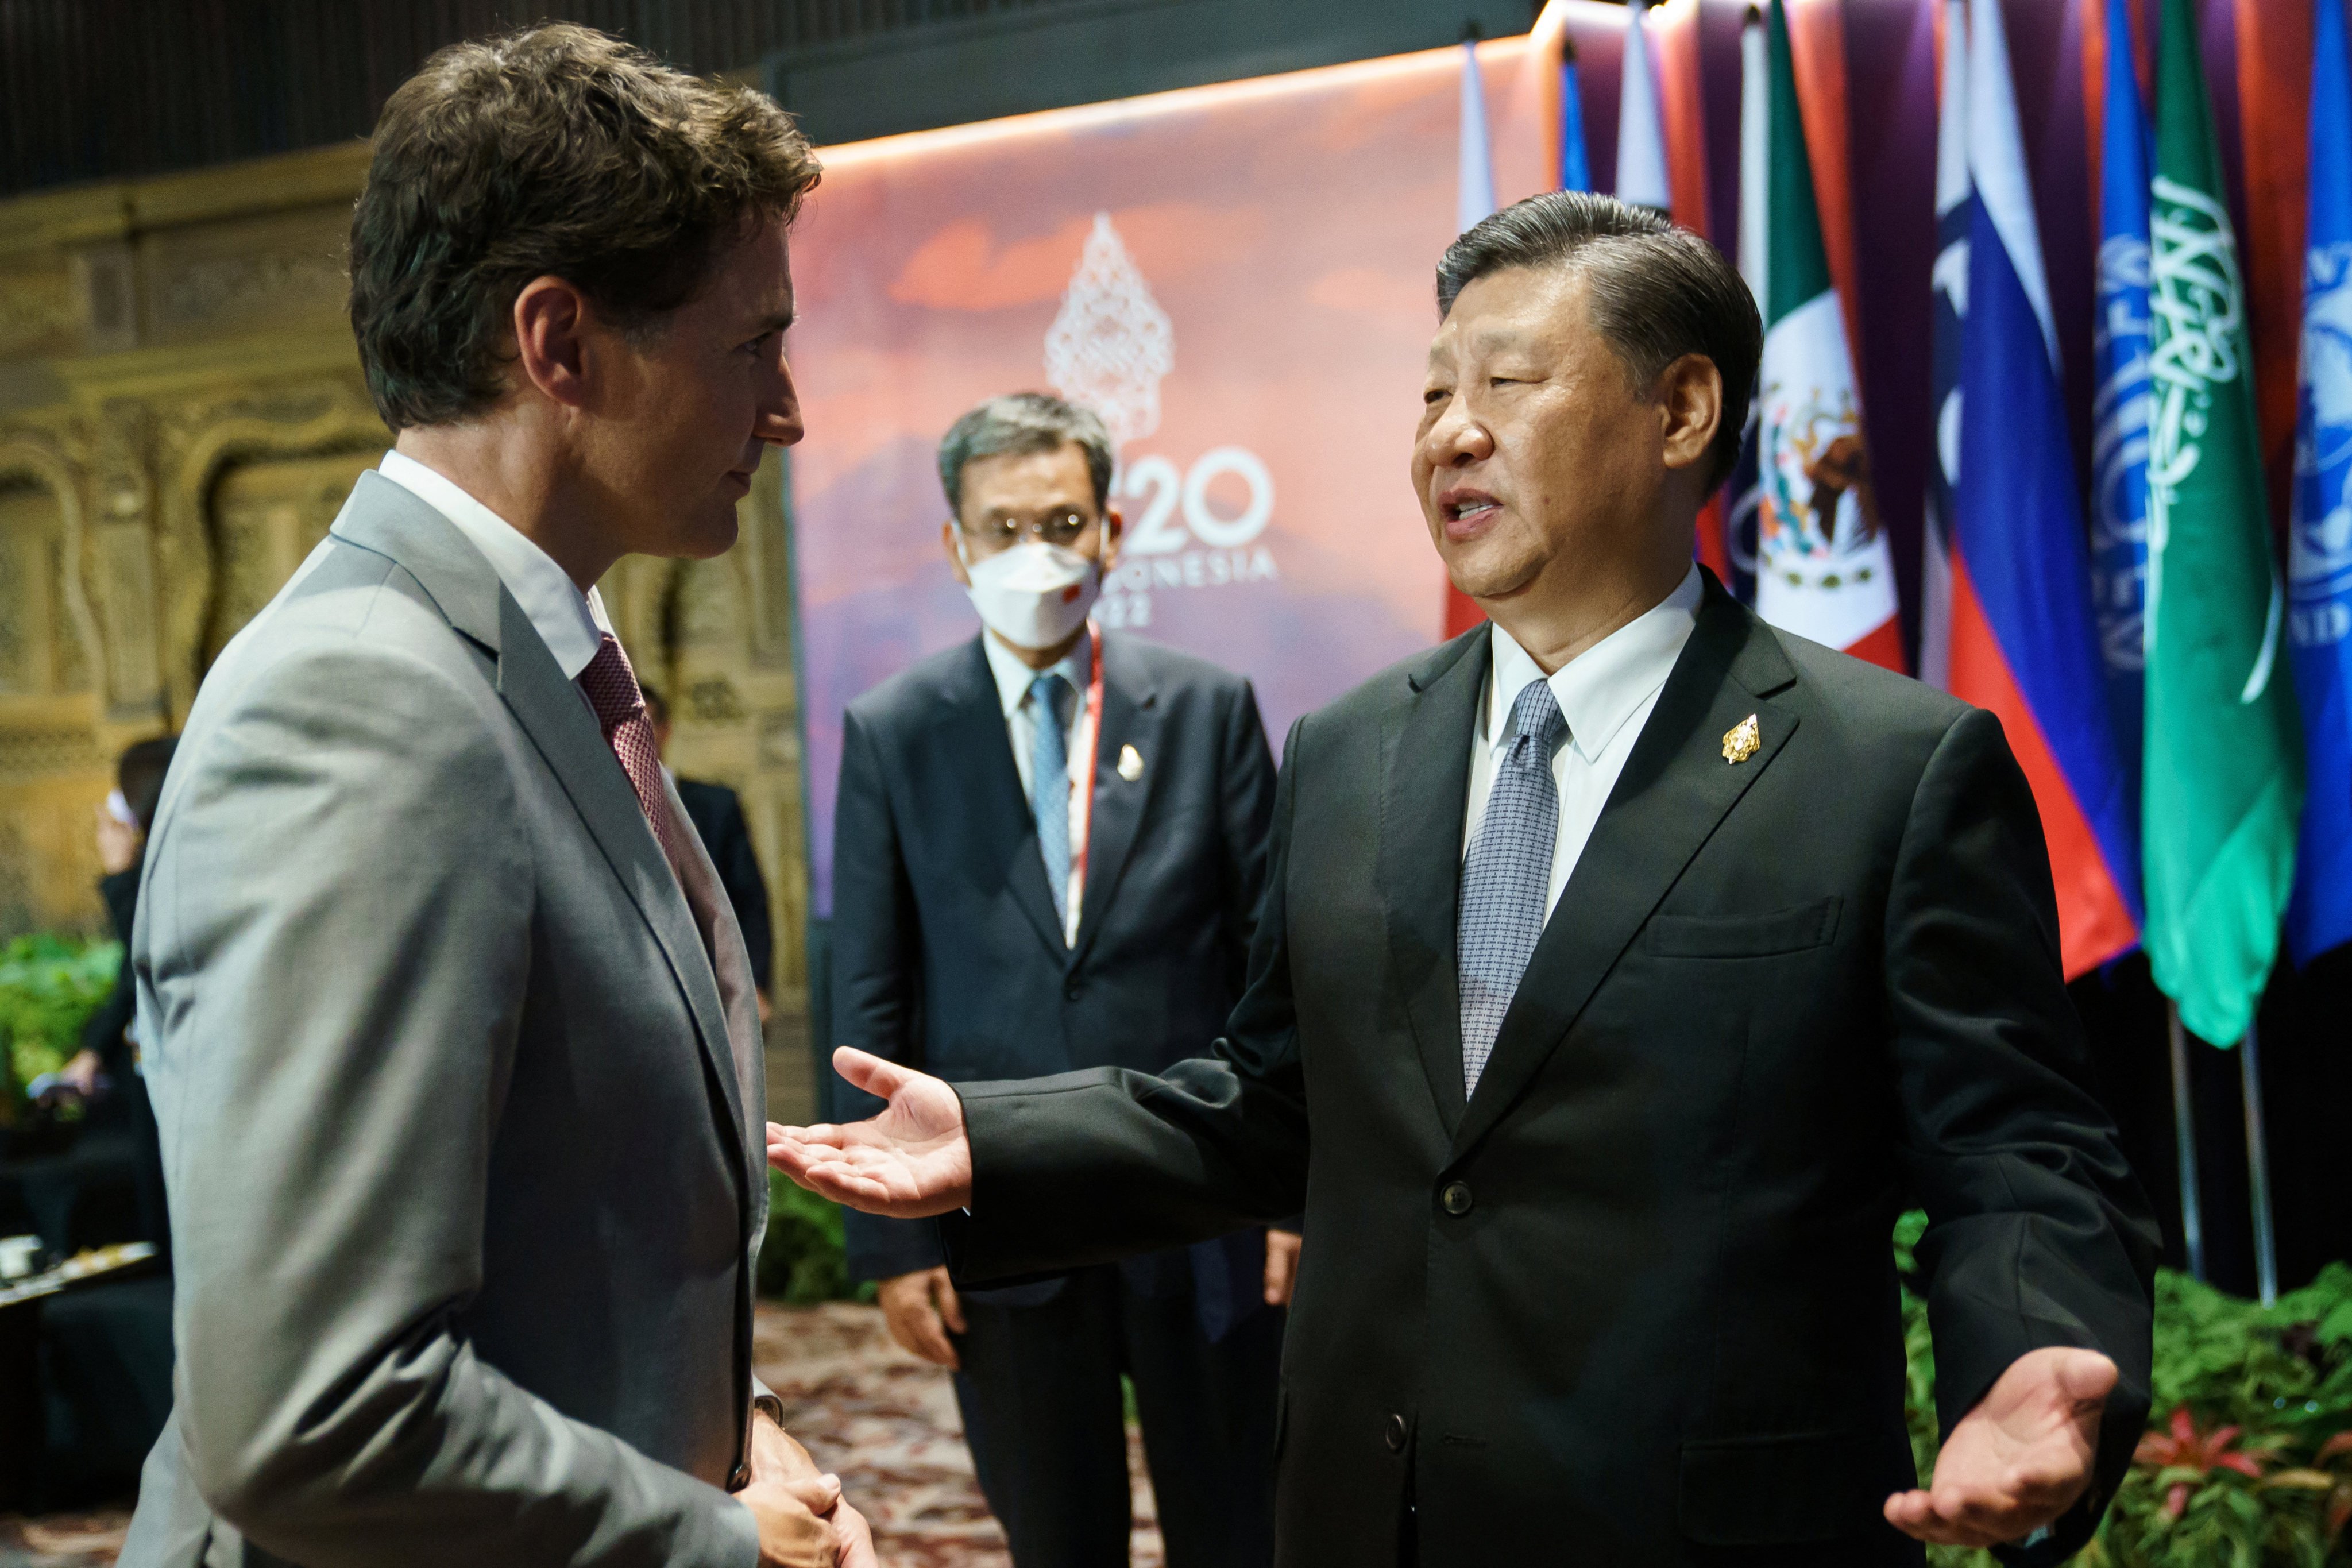 Canada’s Prime Minister Justin Trudeau speaks with China’s President Xi Jinping at the G20 Leaders’ Summit in Bali in 2022. Photo: Reuters